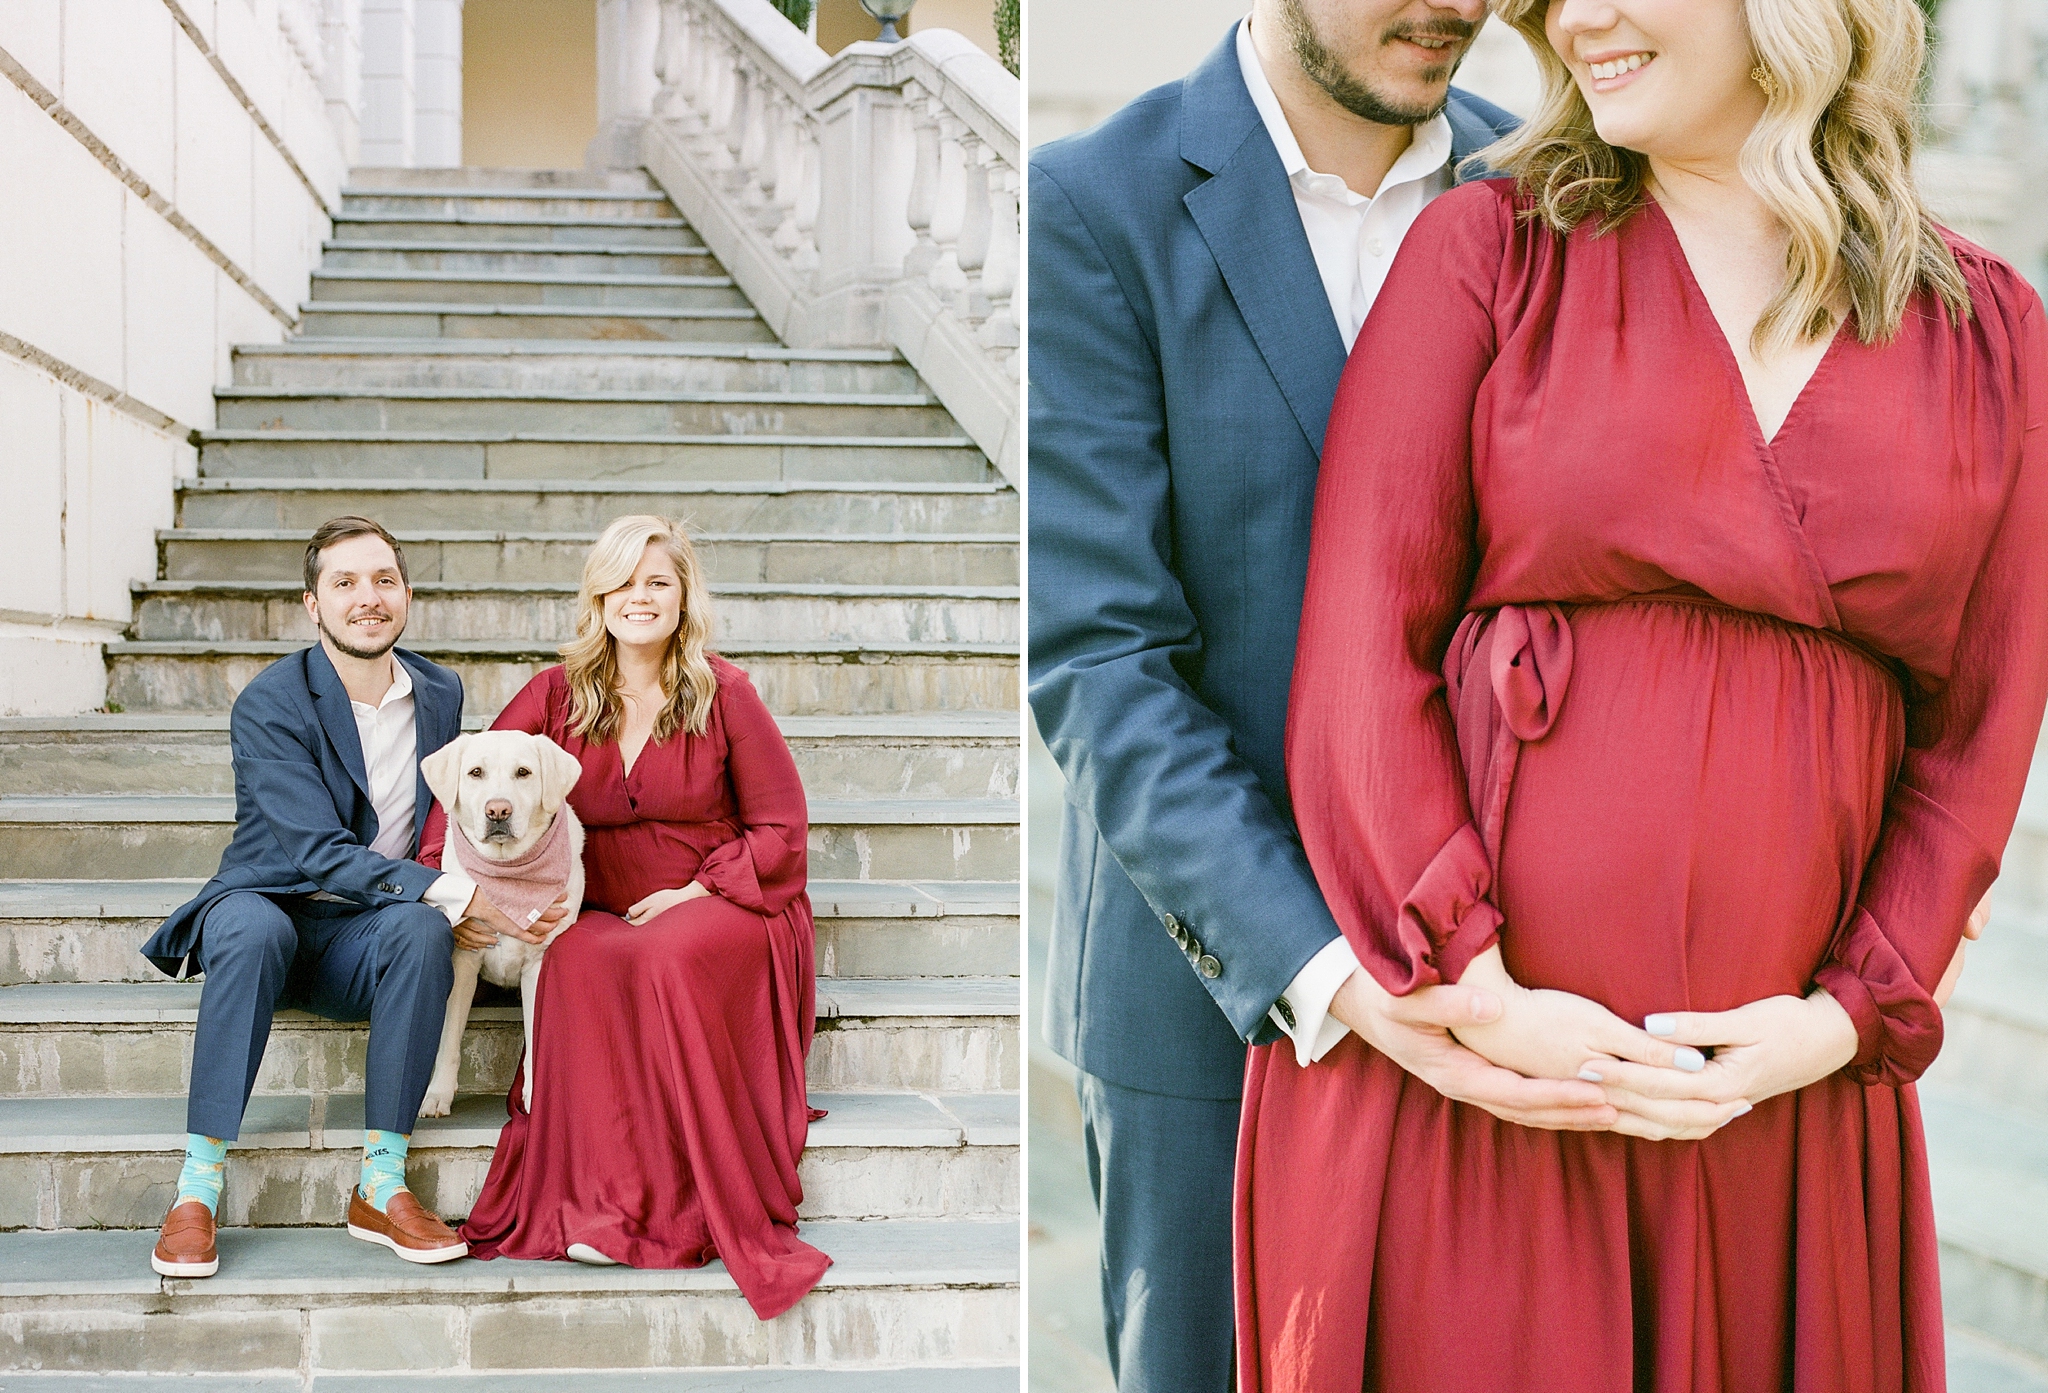 A fine art maternity session in Northern, VA at Airlie Center featuring a stylish couple and their adorable yellow lab.